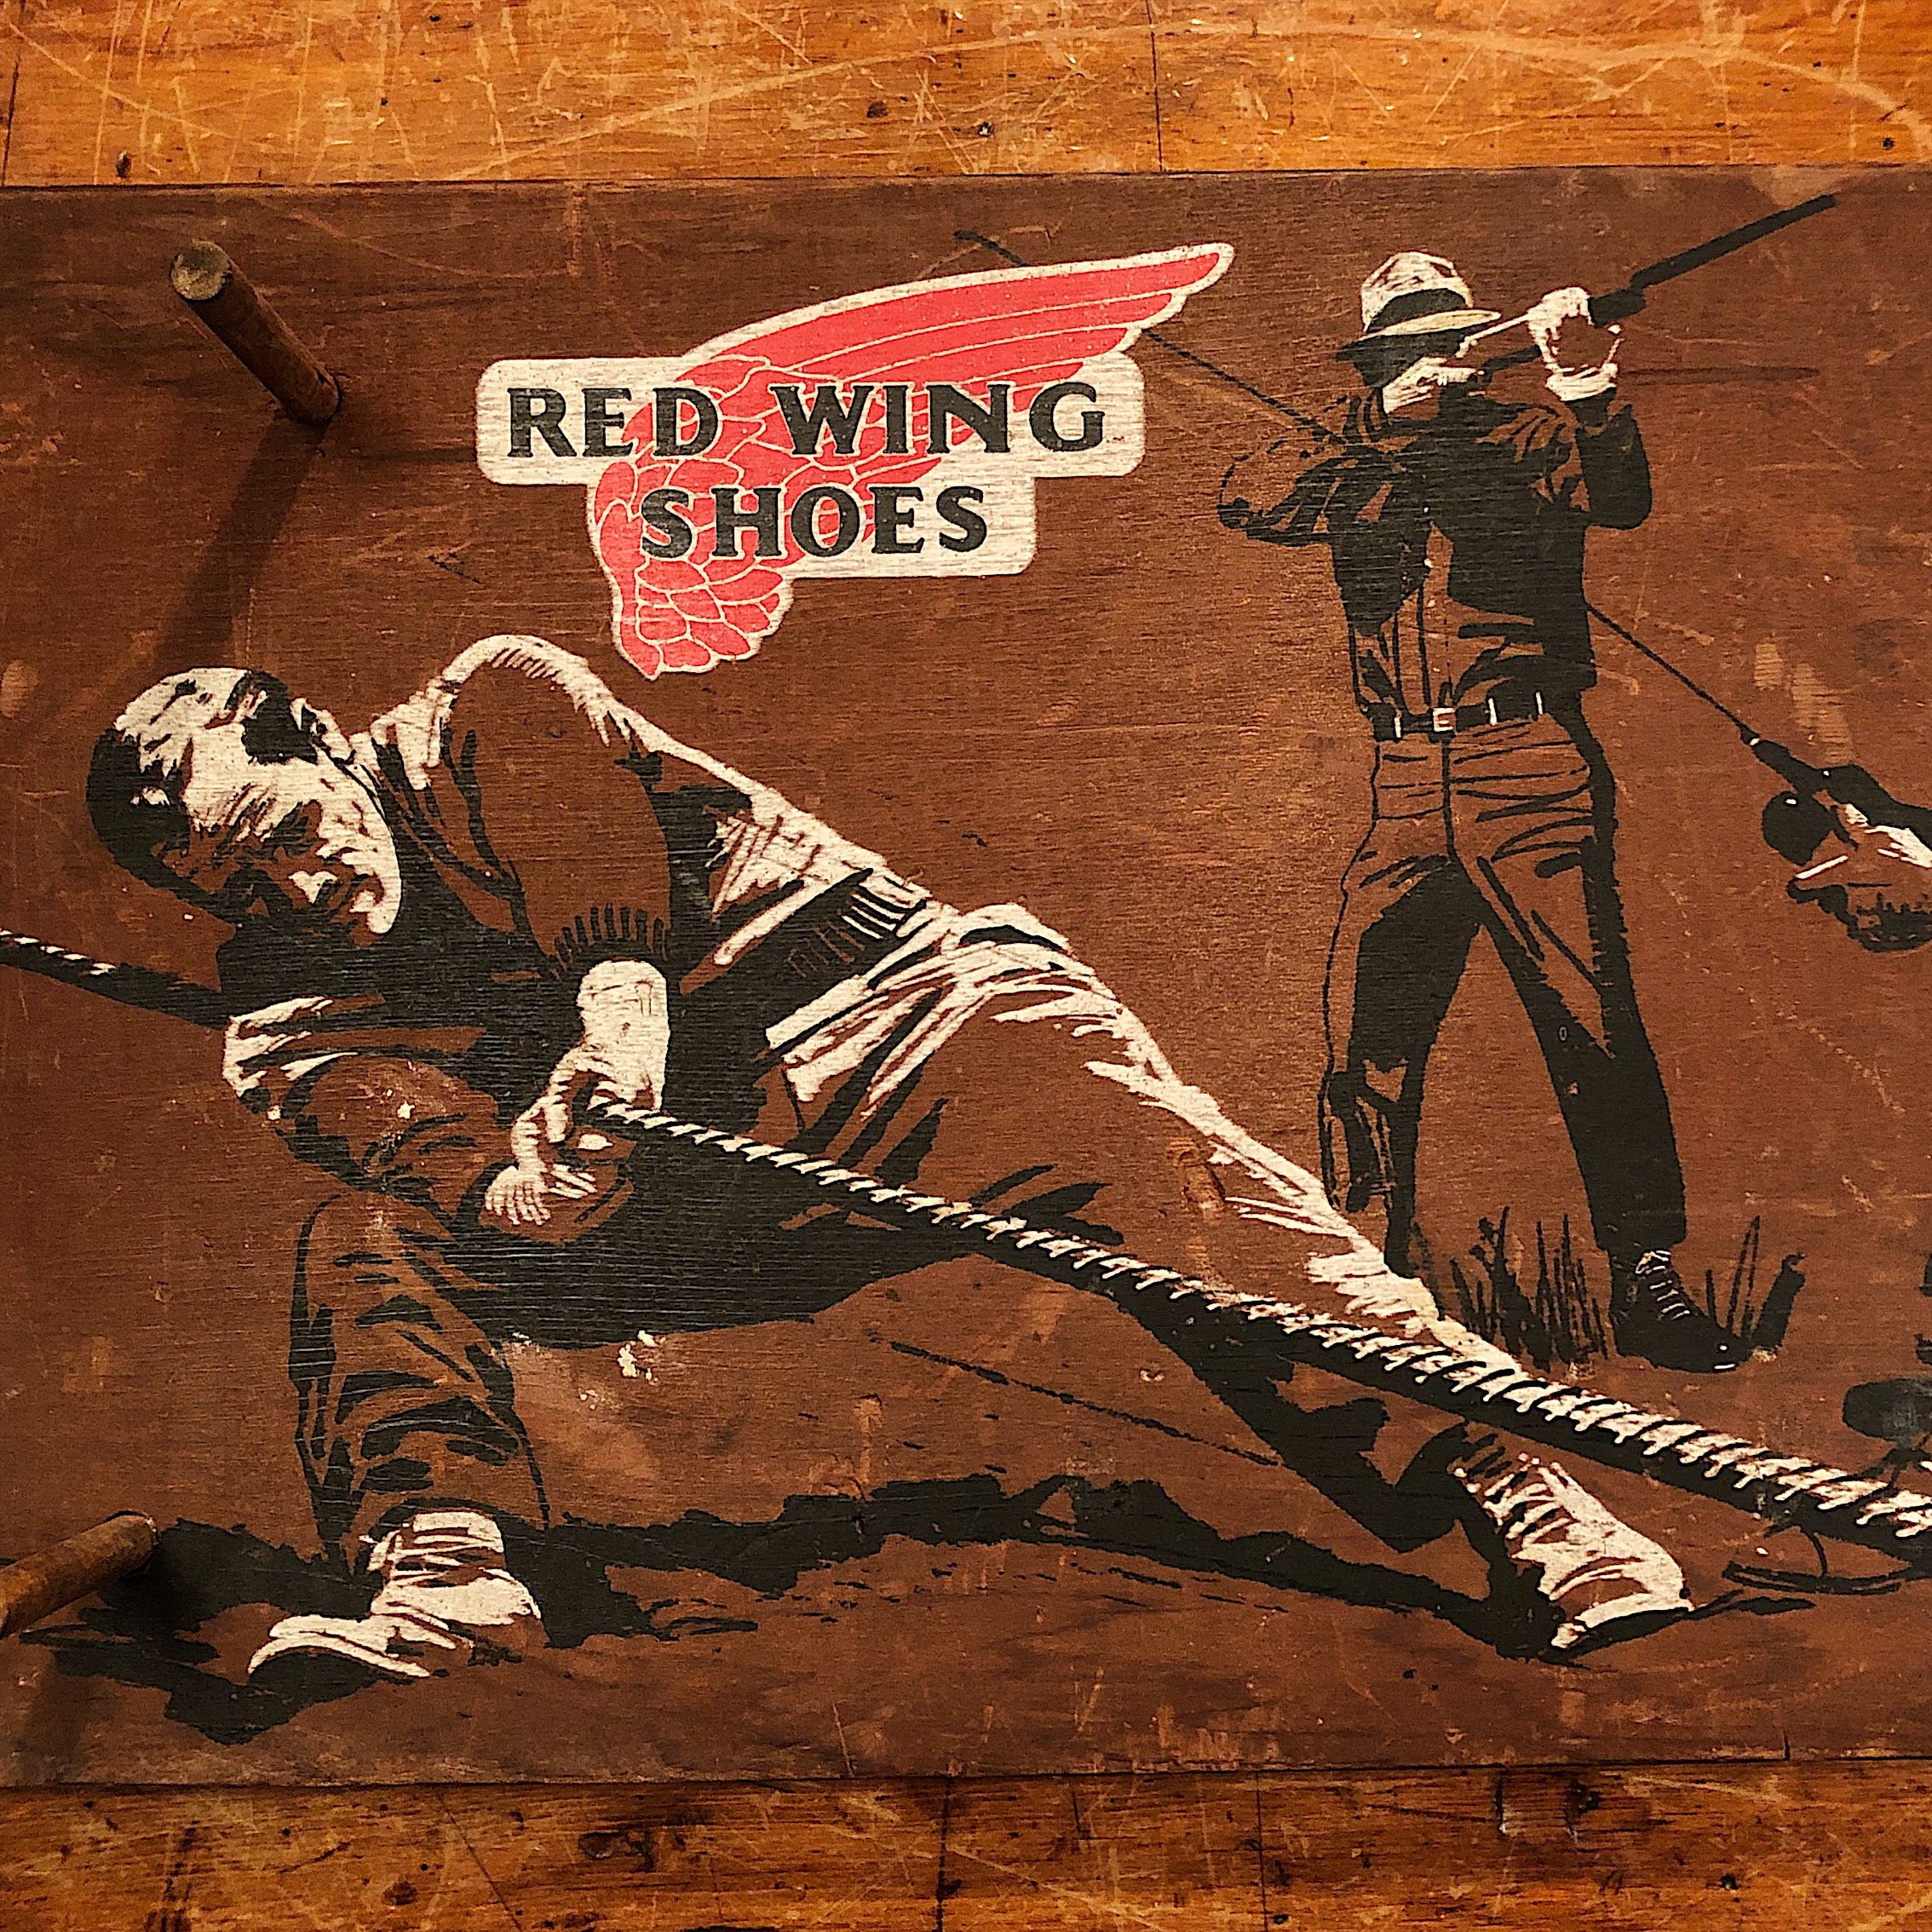 Vintage Red Wing Shoes Store Display Sign - 1960s - Print on Wood Peg Hanger - Workwear - Fishing Hunting Working - Rare Advertising Piece